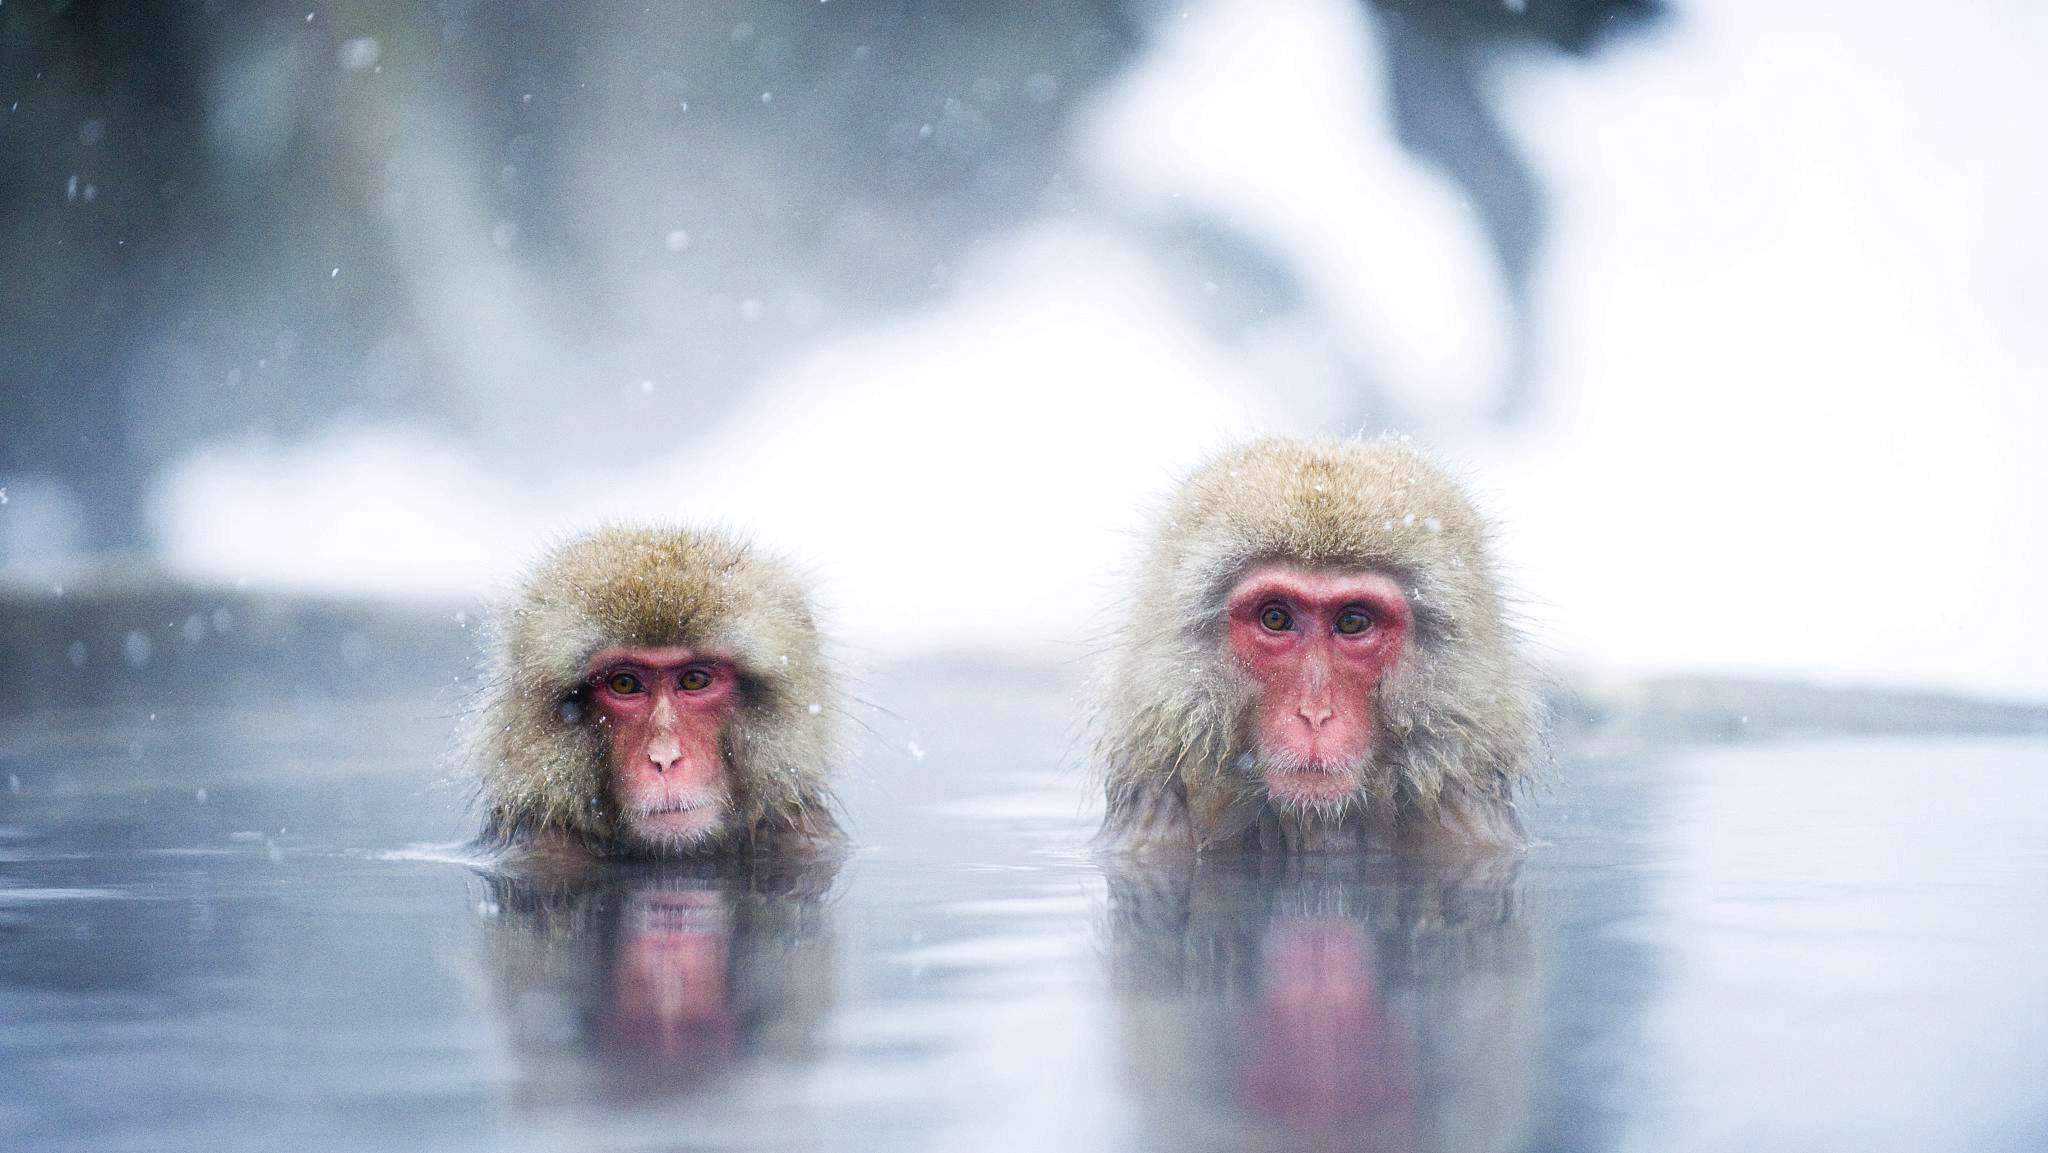 What the lie about 8 wet, cold monkeys can tell us about the